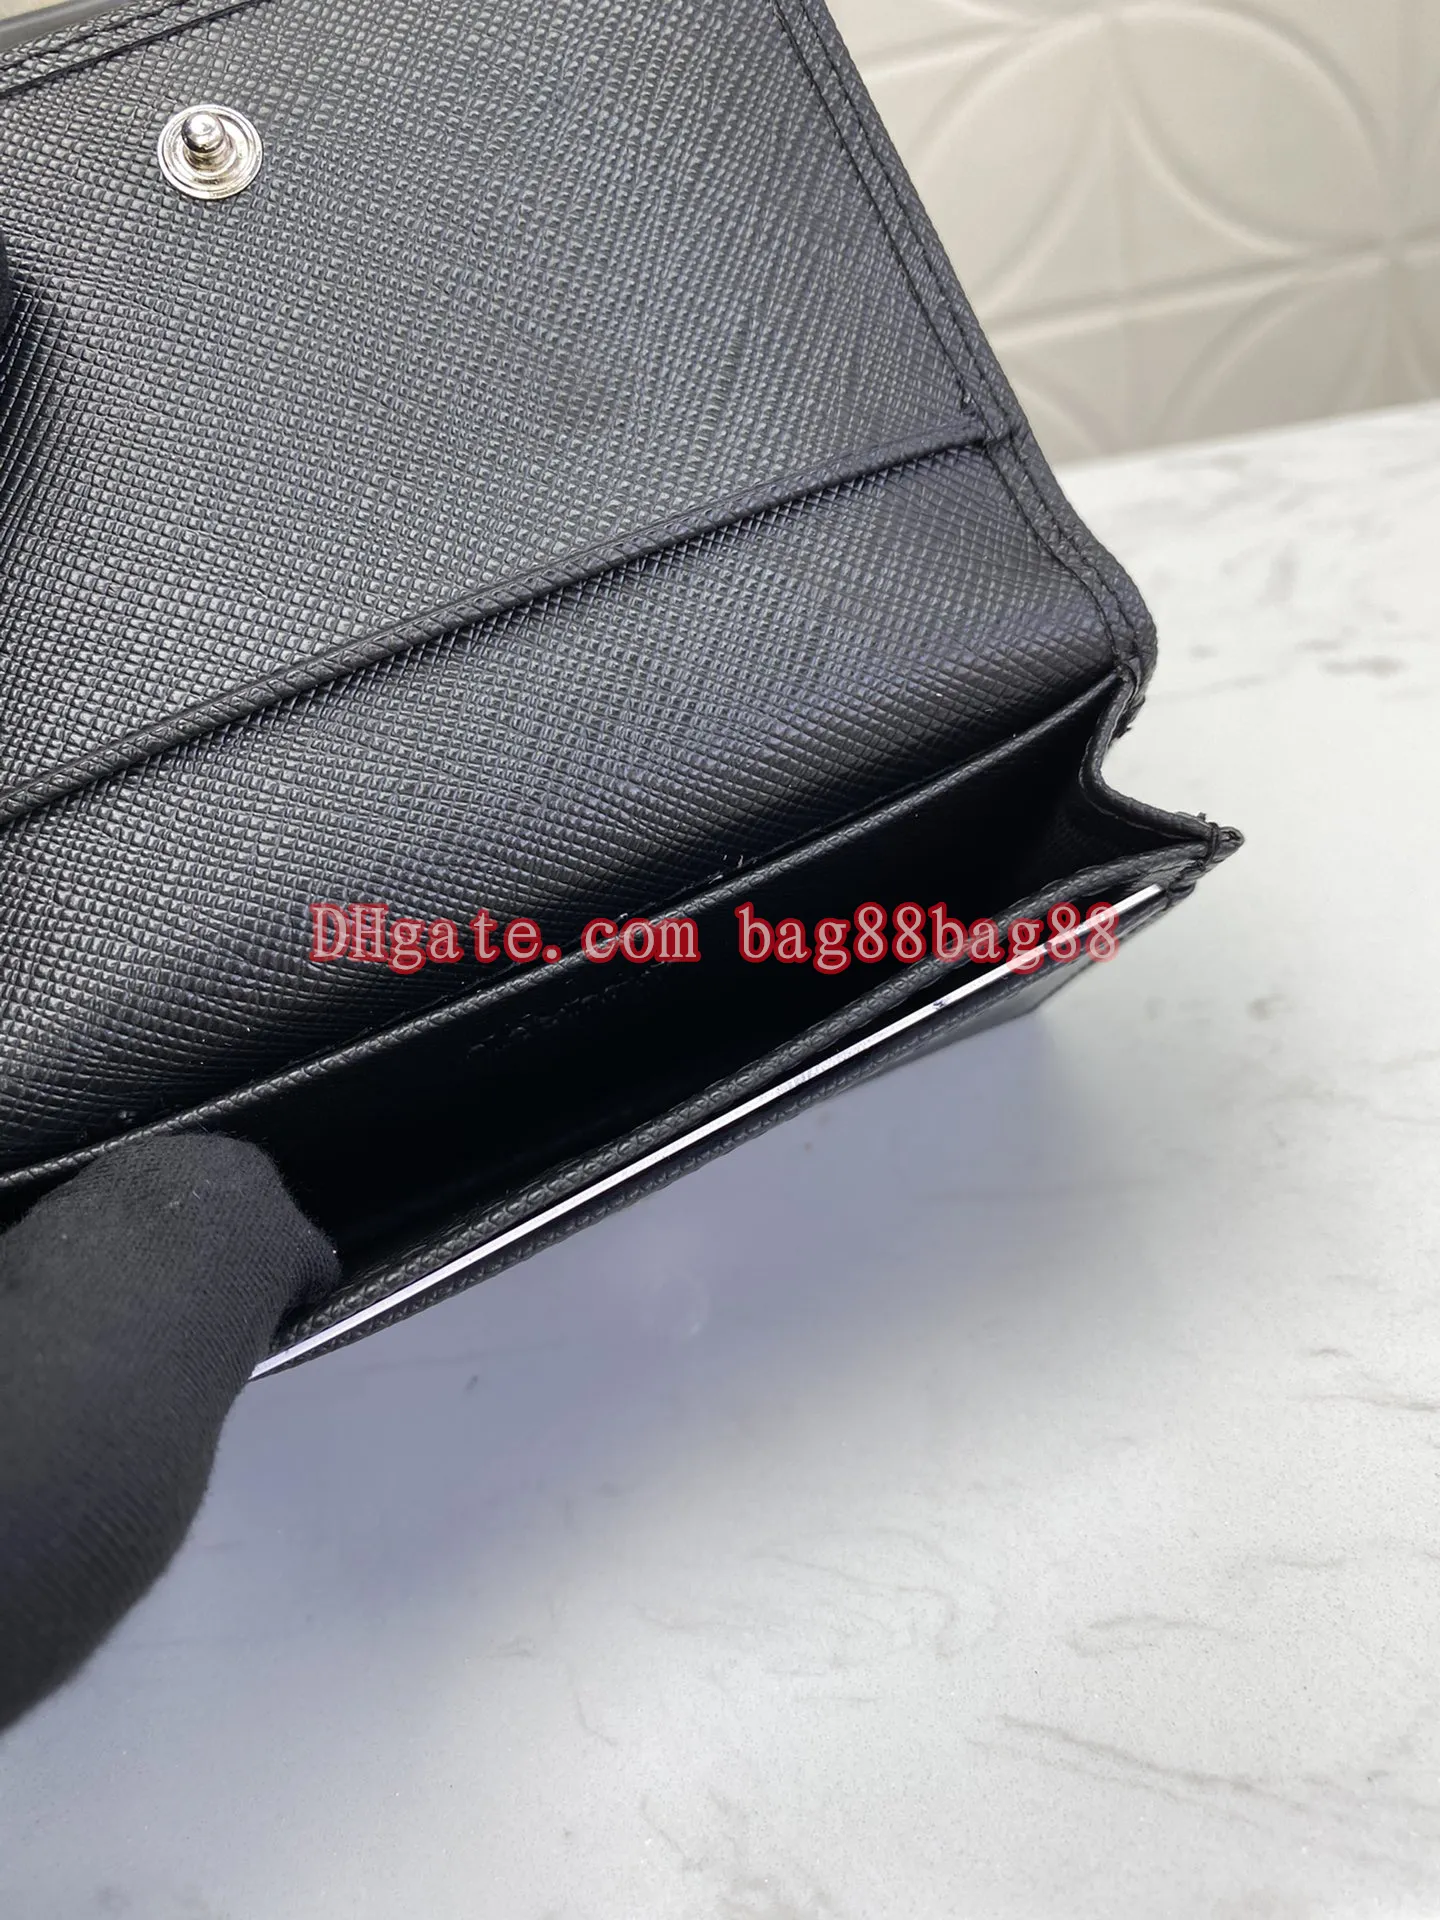 Fashion style men039s card bag Sell the latest styles 2MC122 Italy039s top original single cross leather texture is exce4699720